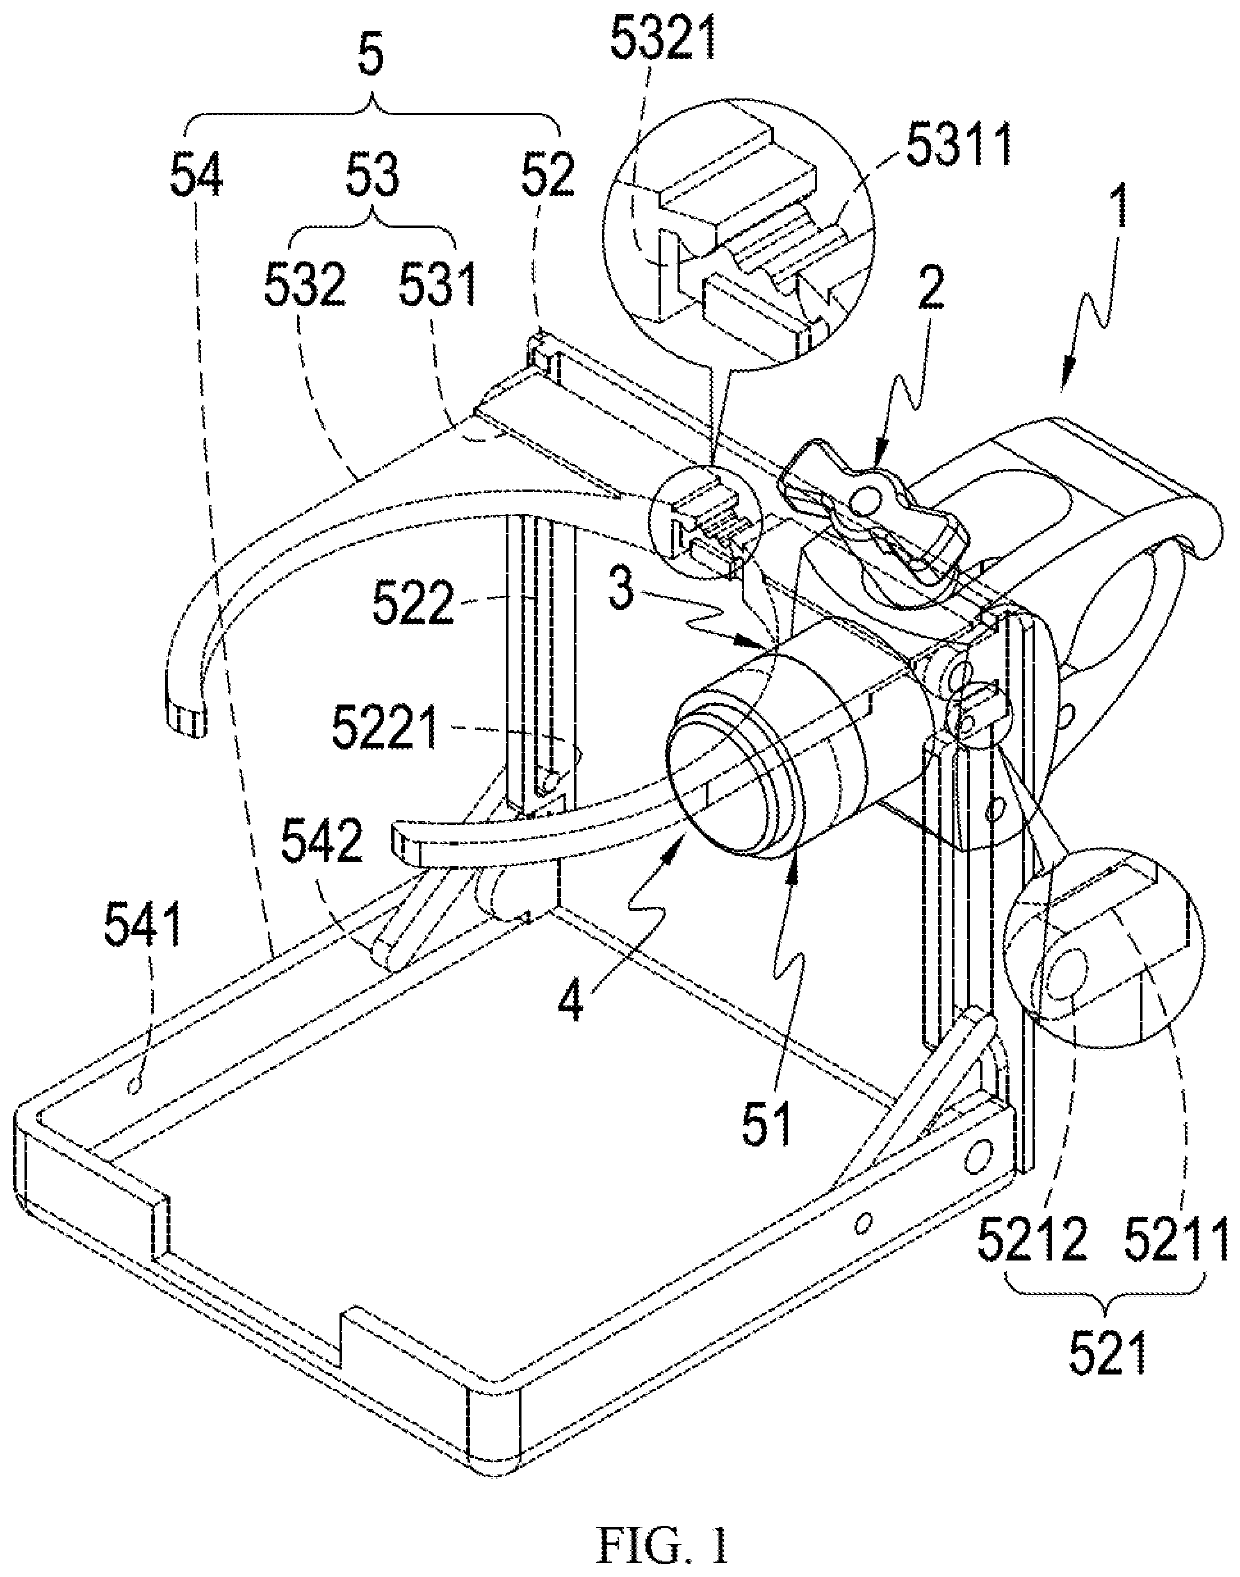 Drink holder mounting structure for attaching to various tubular objects